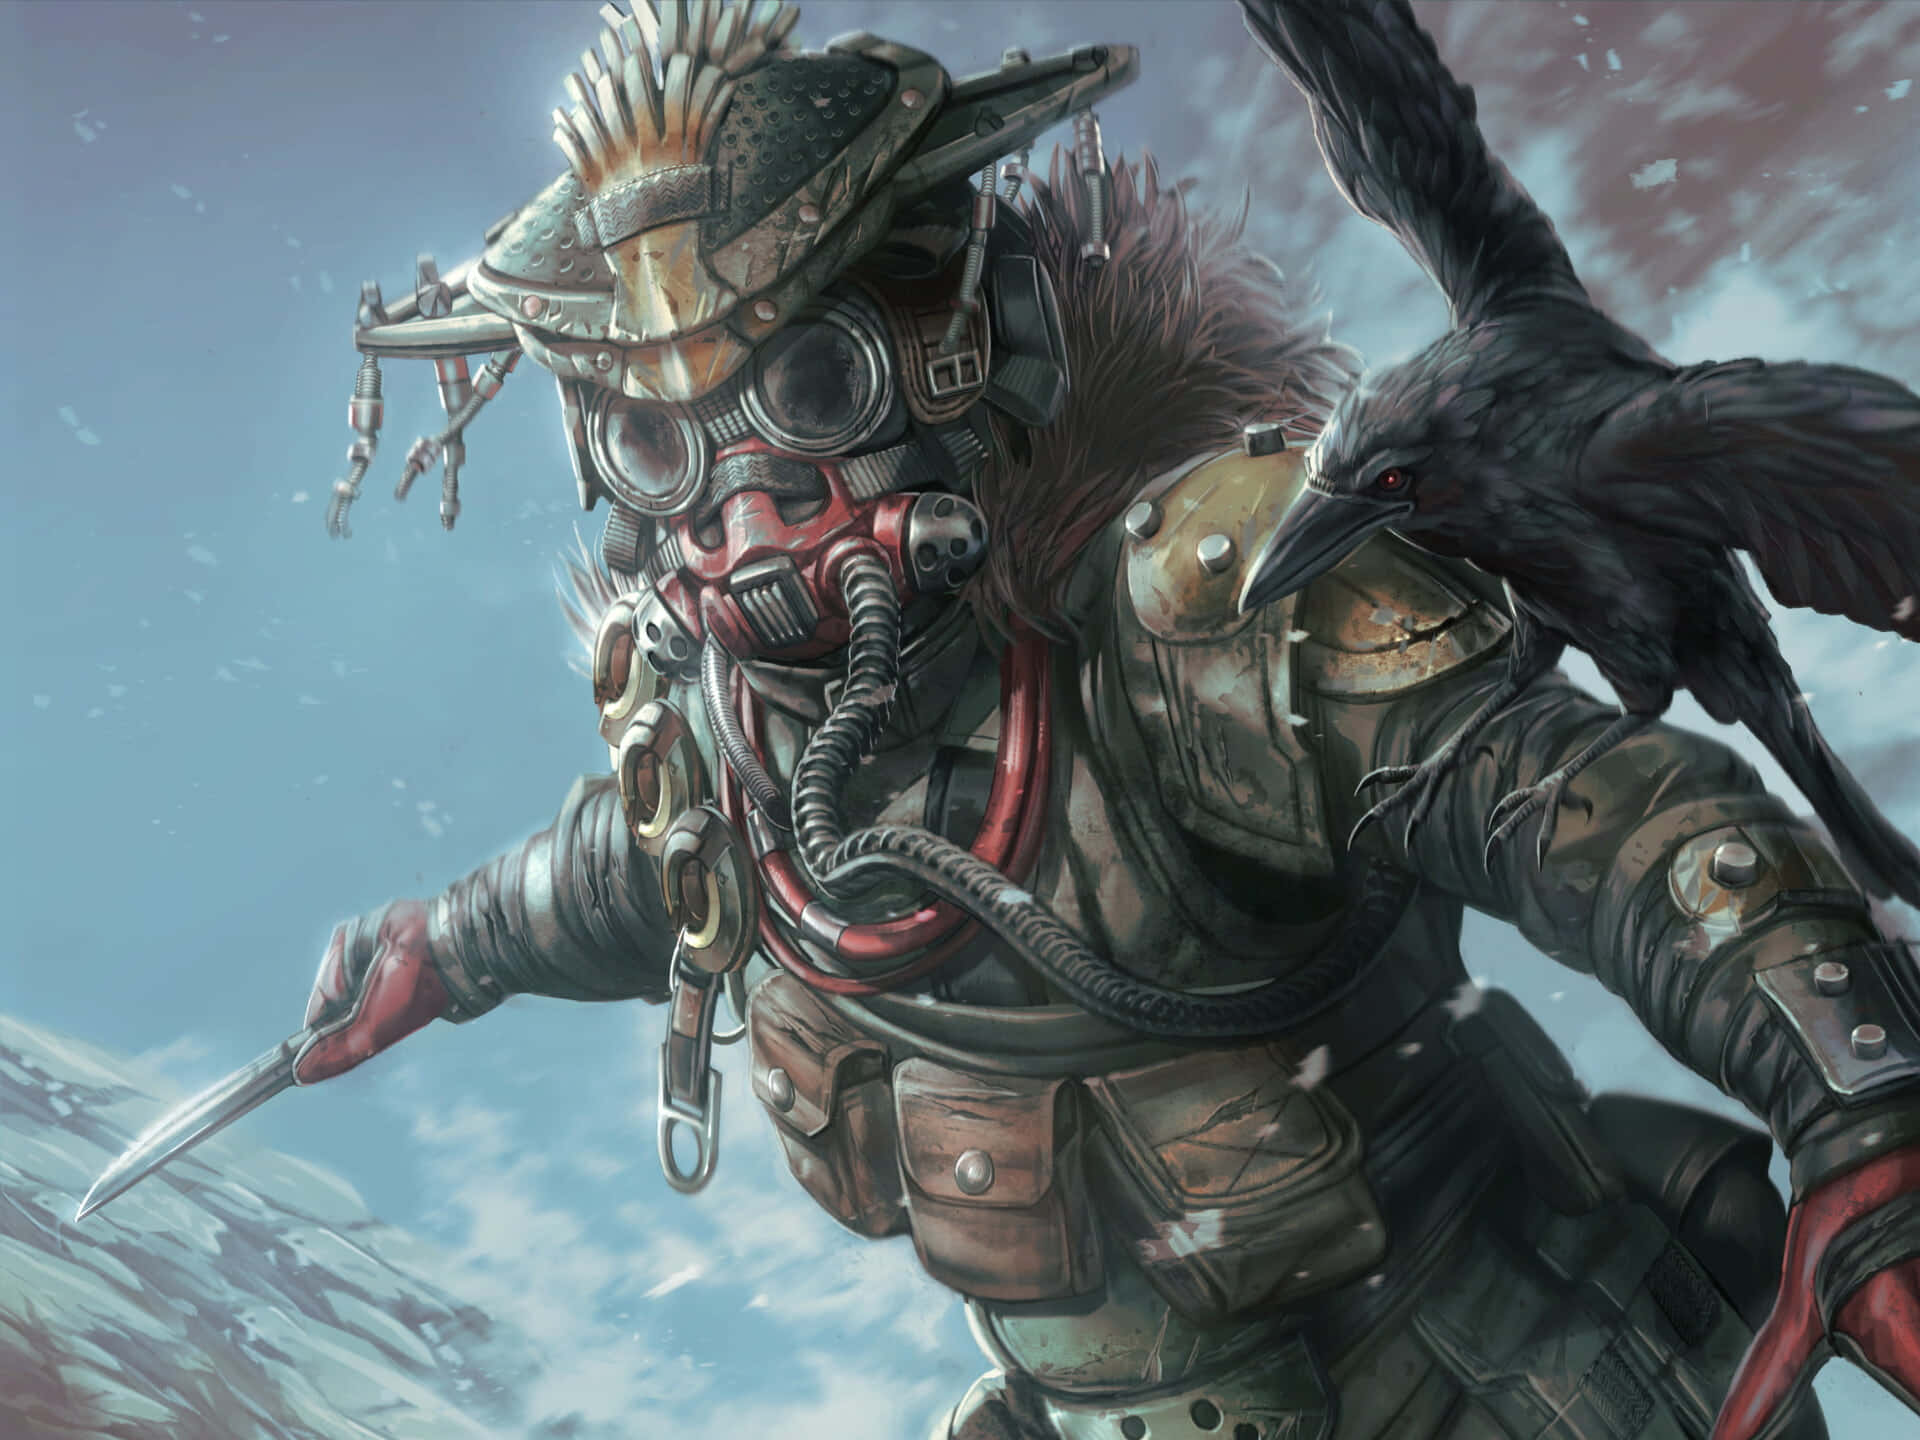 Stand out from the pack in Apex Legends with the powerful and mysterious Bloodhound Wallpaper